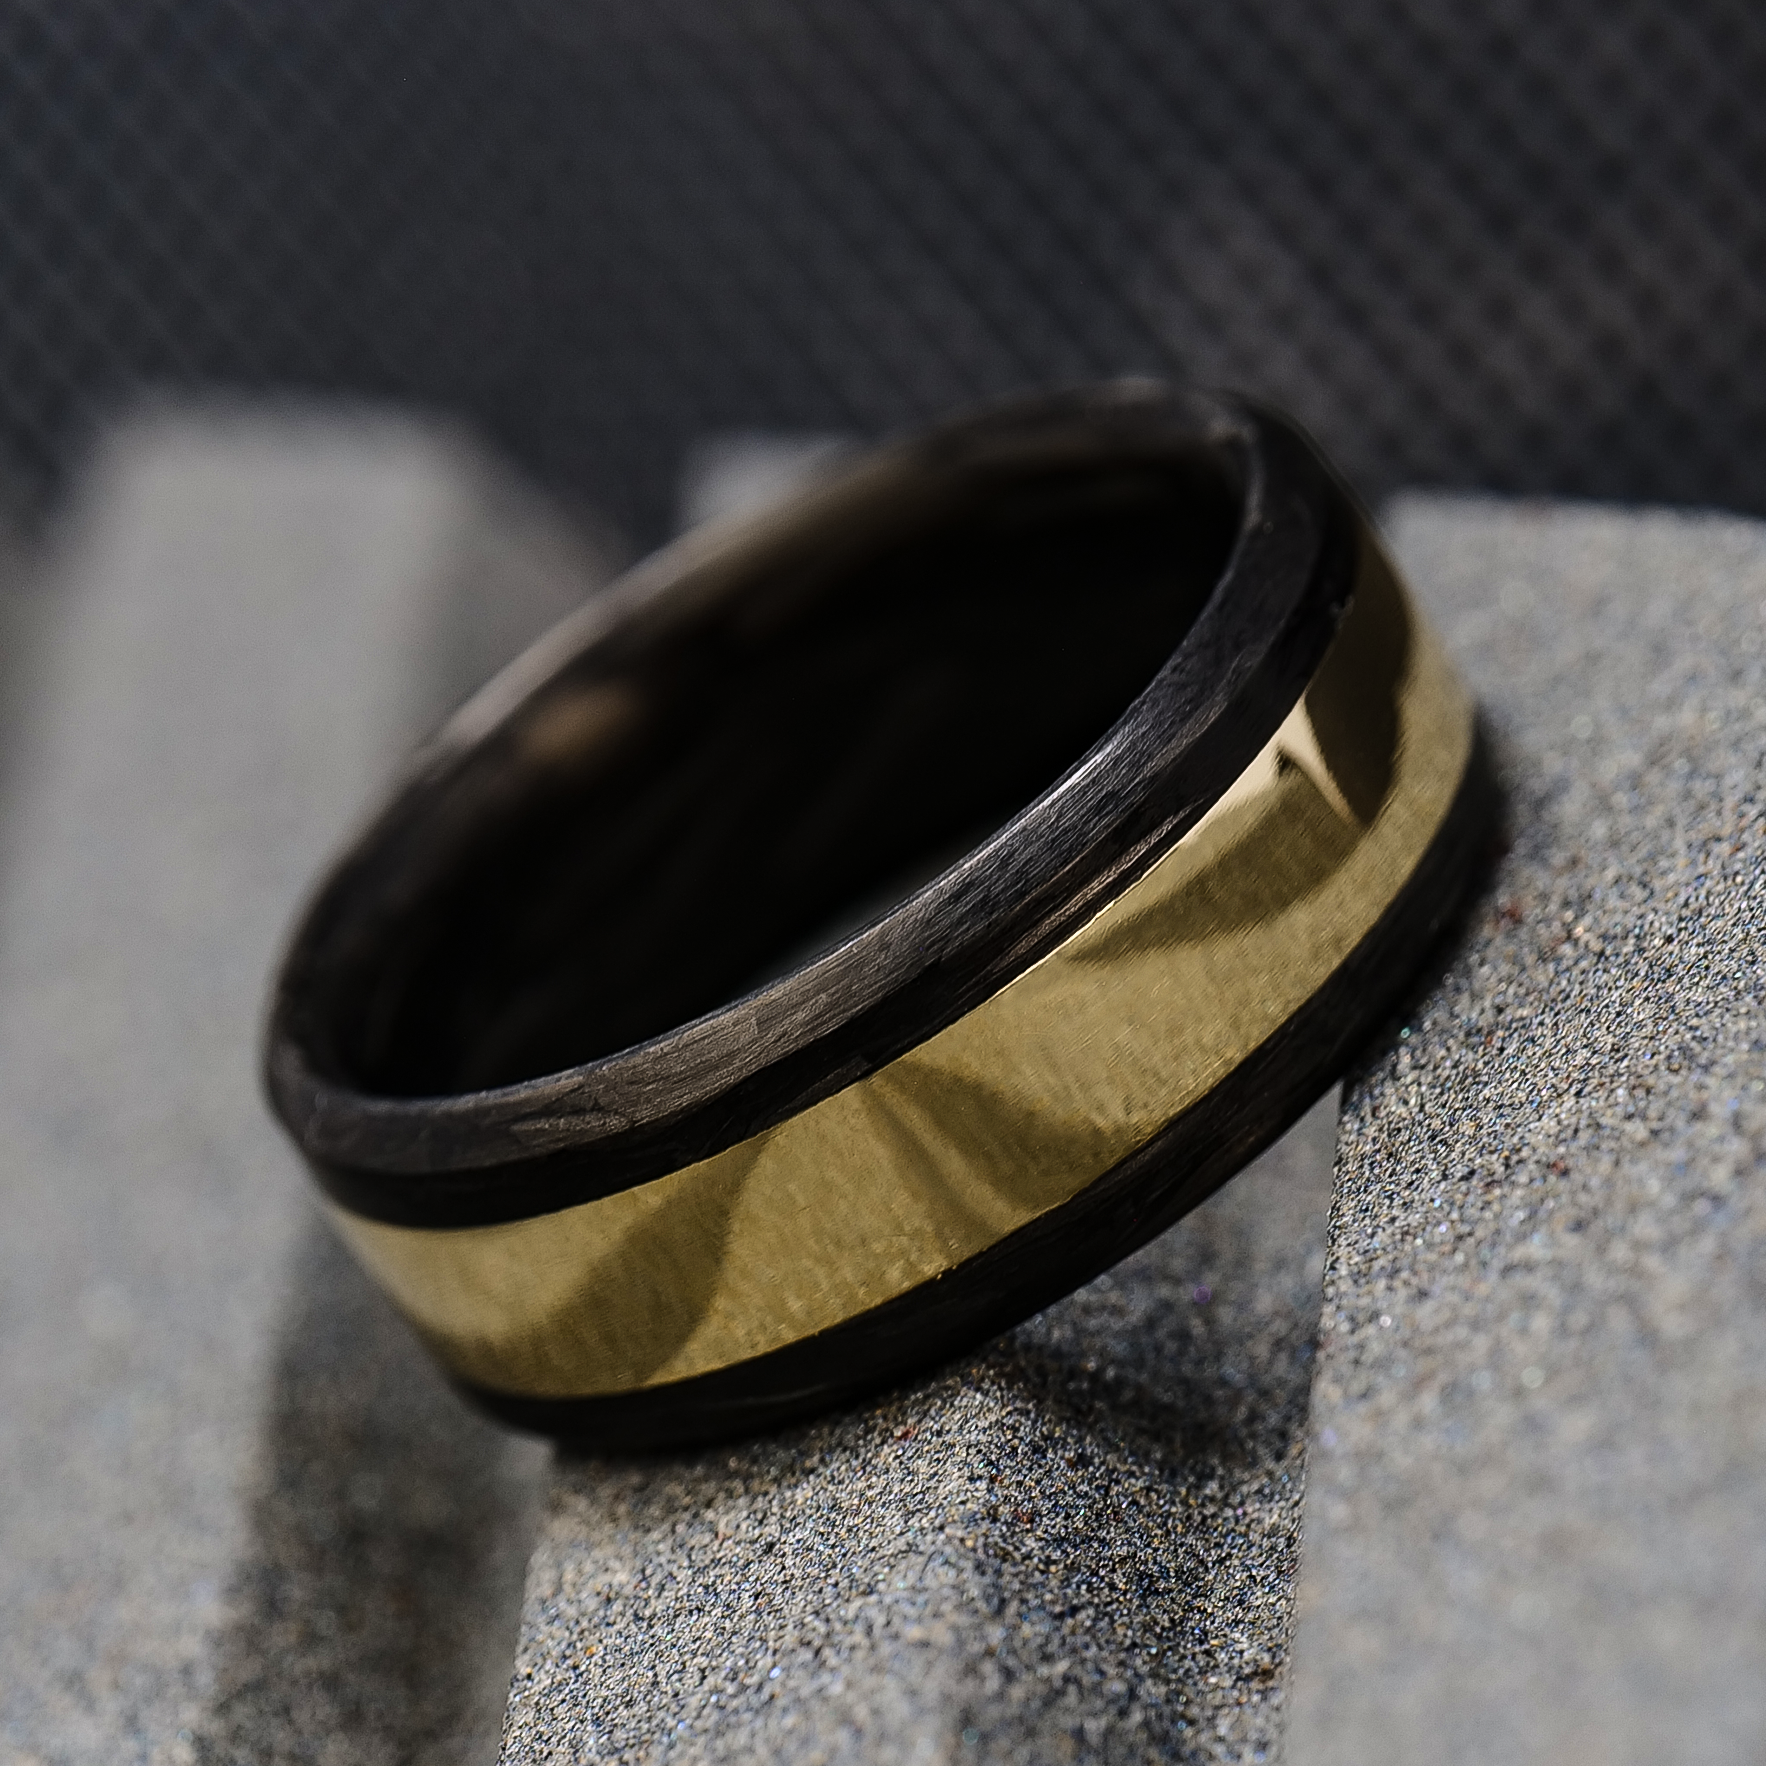 New 18k Gold Tone Mens Tungsten Wedding Band Ring with Black Carbon | eBay